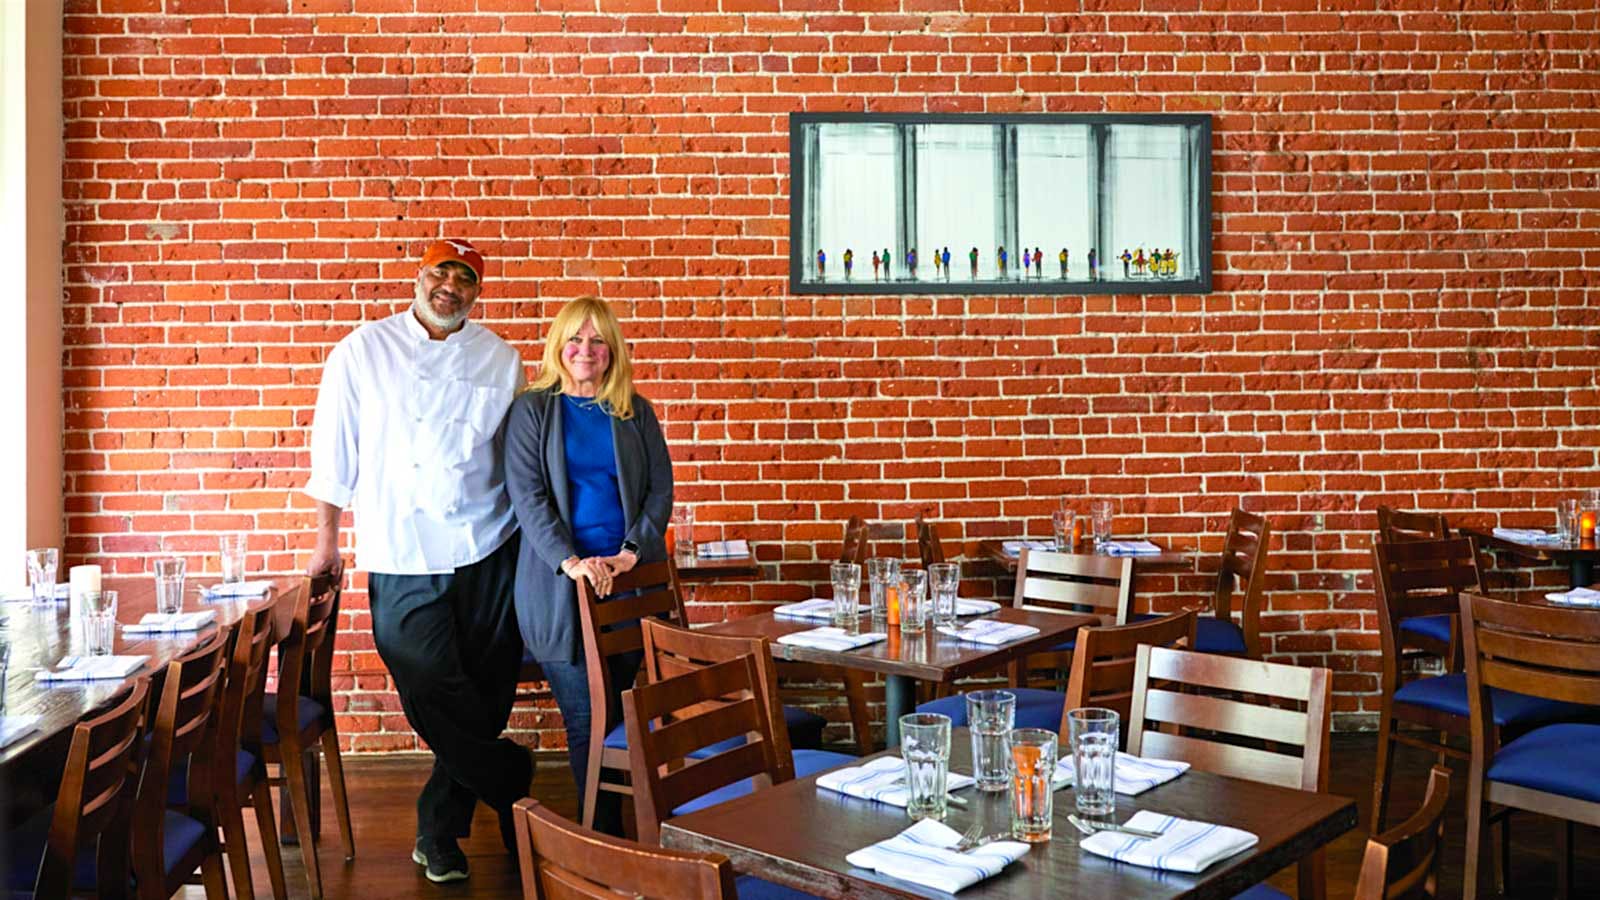 The two owners standing in front of a brick wall in their restaurant